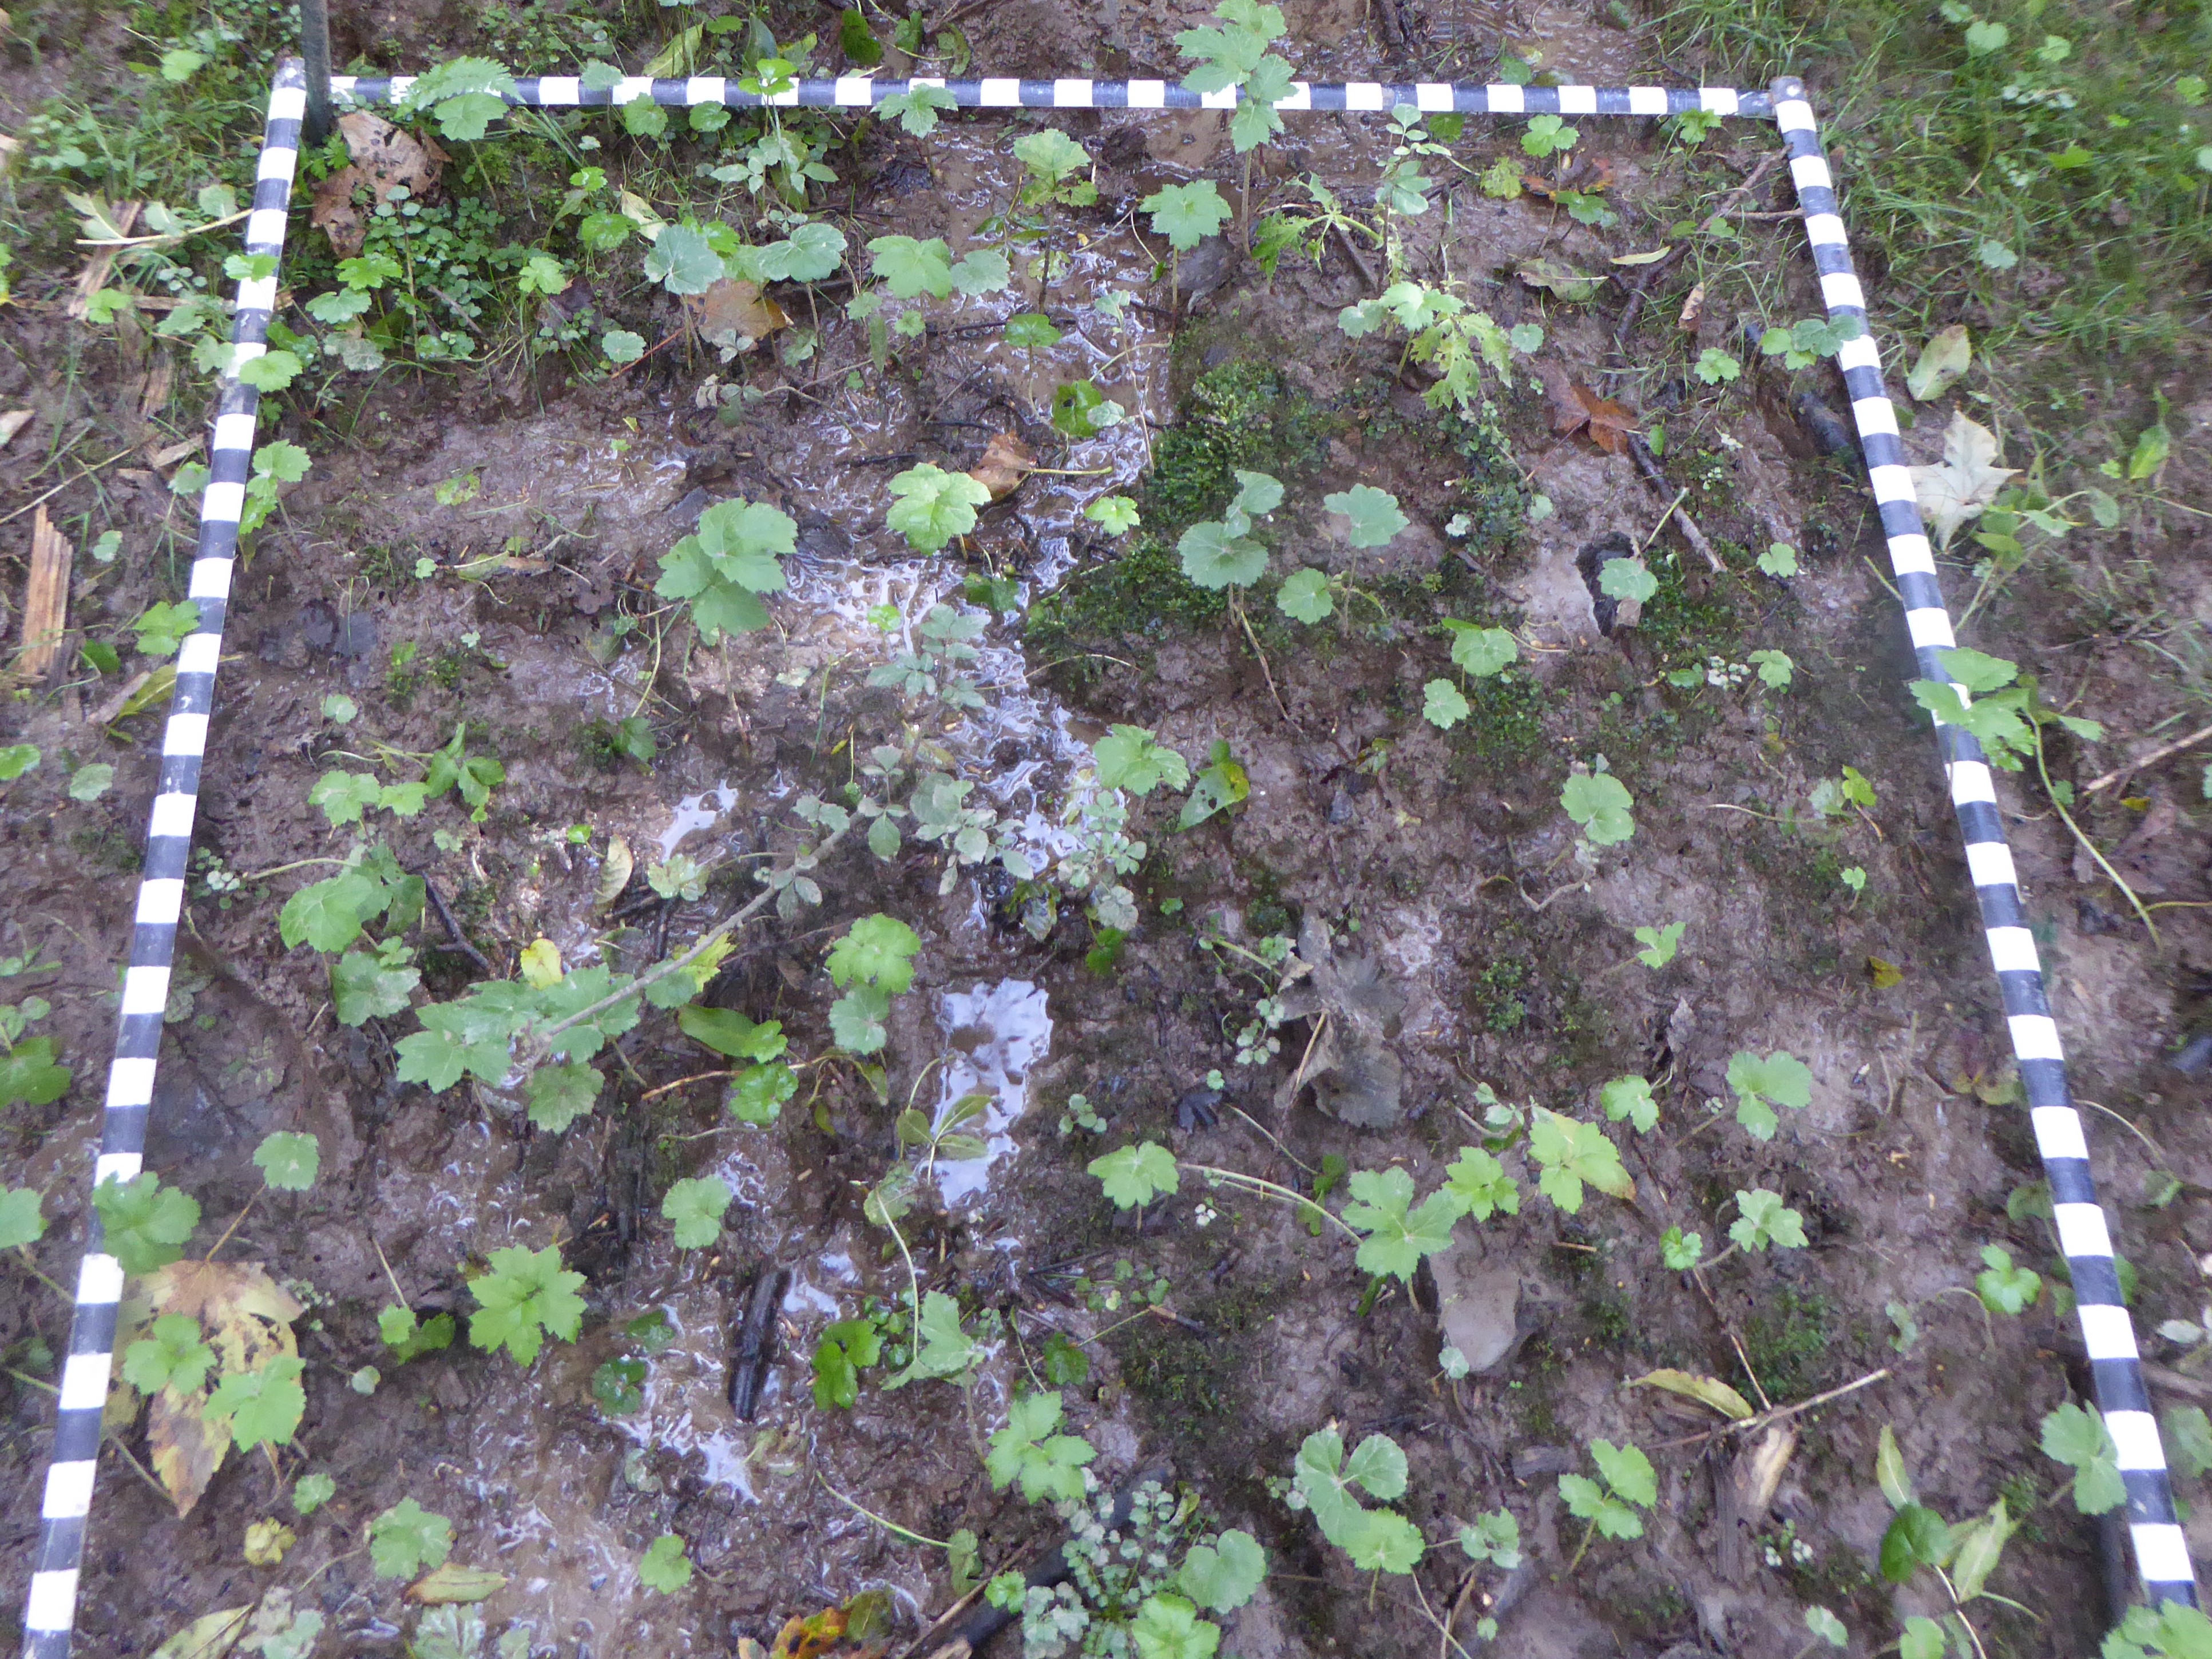 Monitoring square with poached bare soil and proliferation of Giant hogweed seedlings